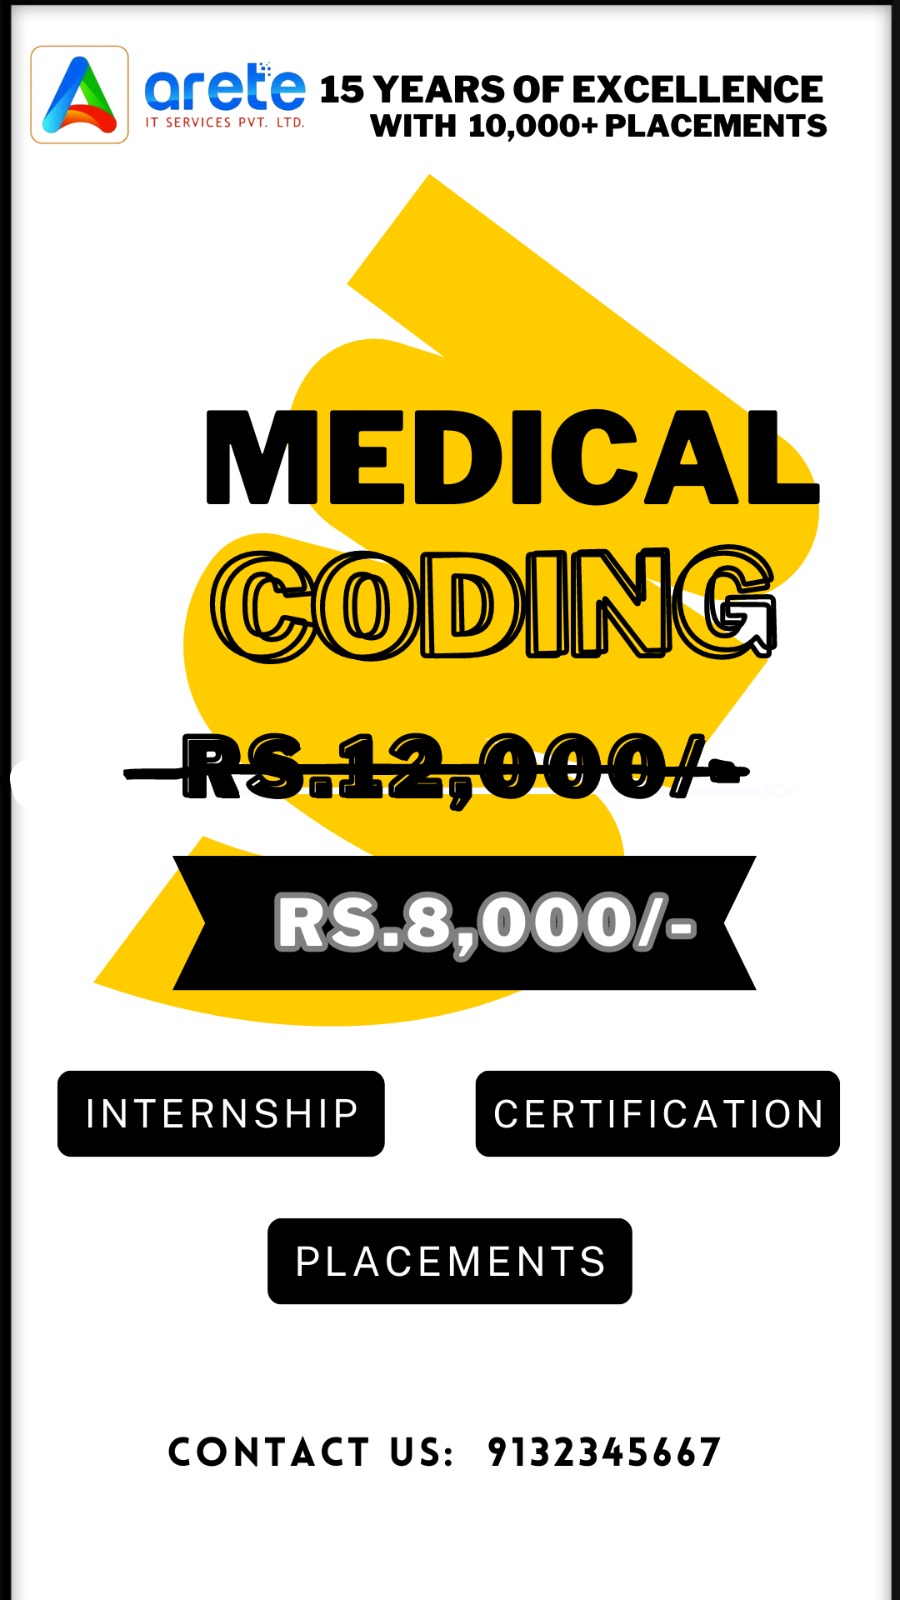 Medical coding training and placement assistanceServicesEverything ElseAll Indiaother